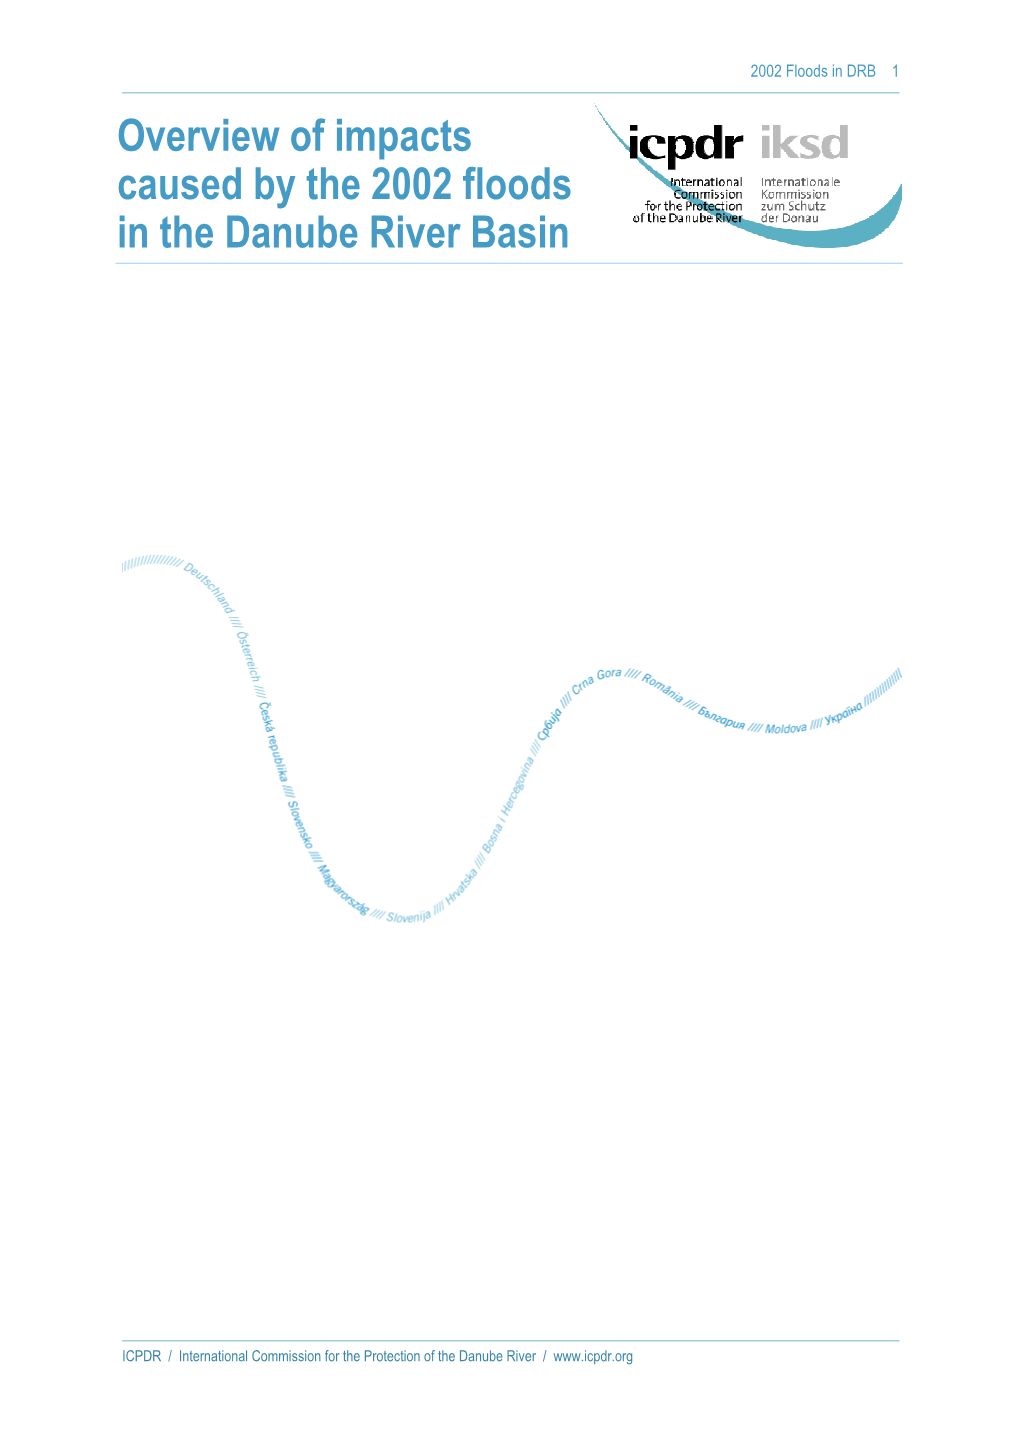 Overview of Impacts Caused by the 2002 Floods in the Danube River Basin